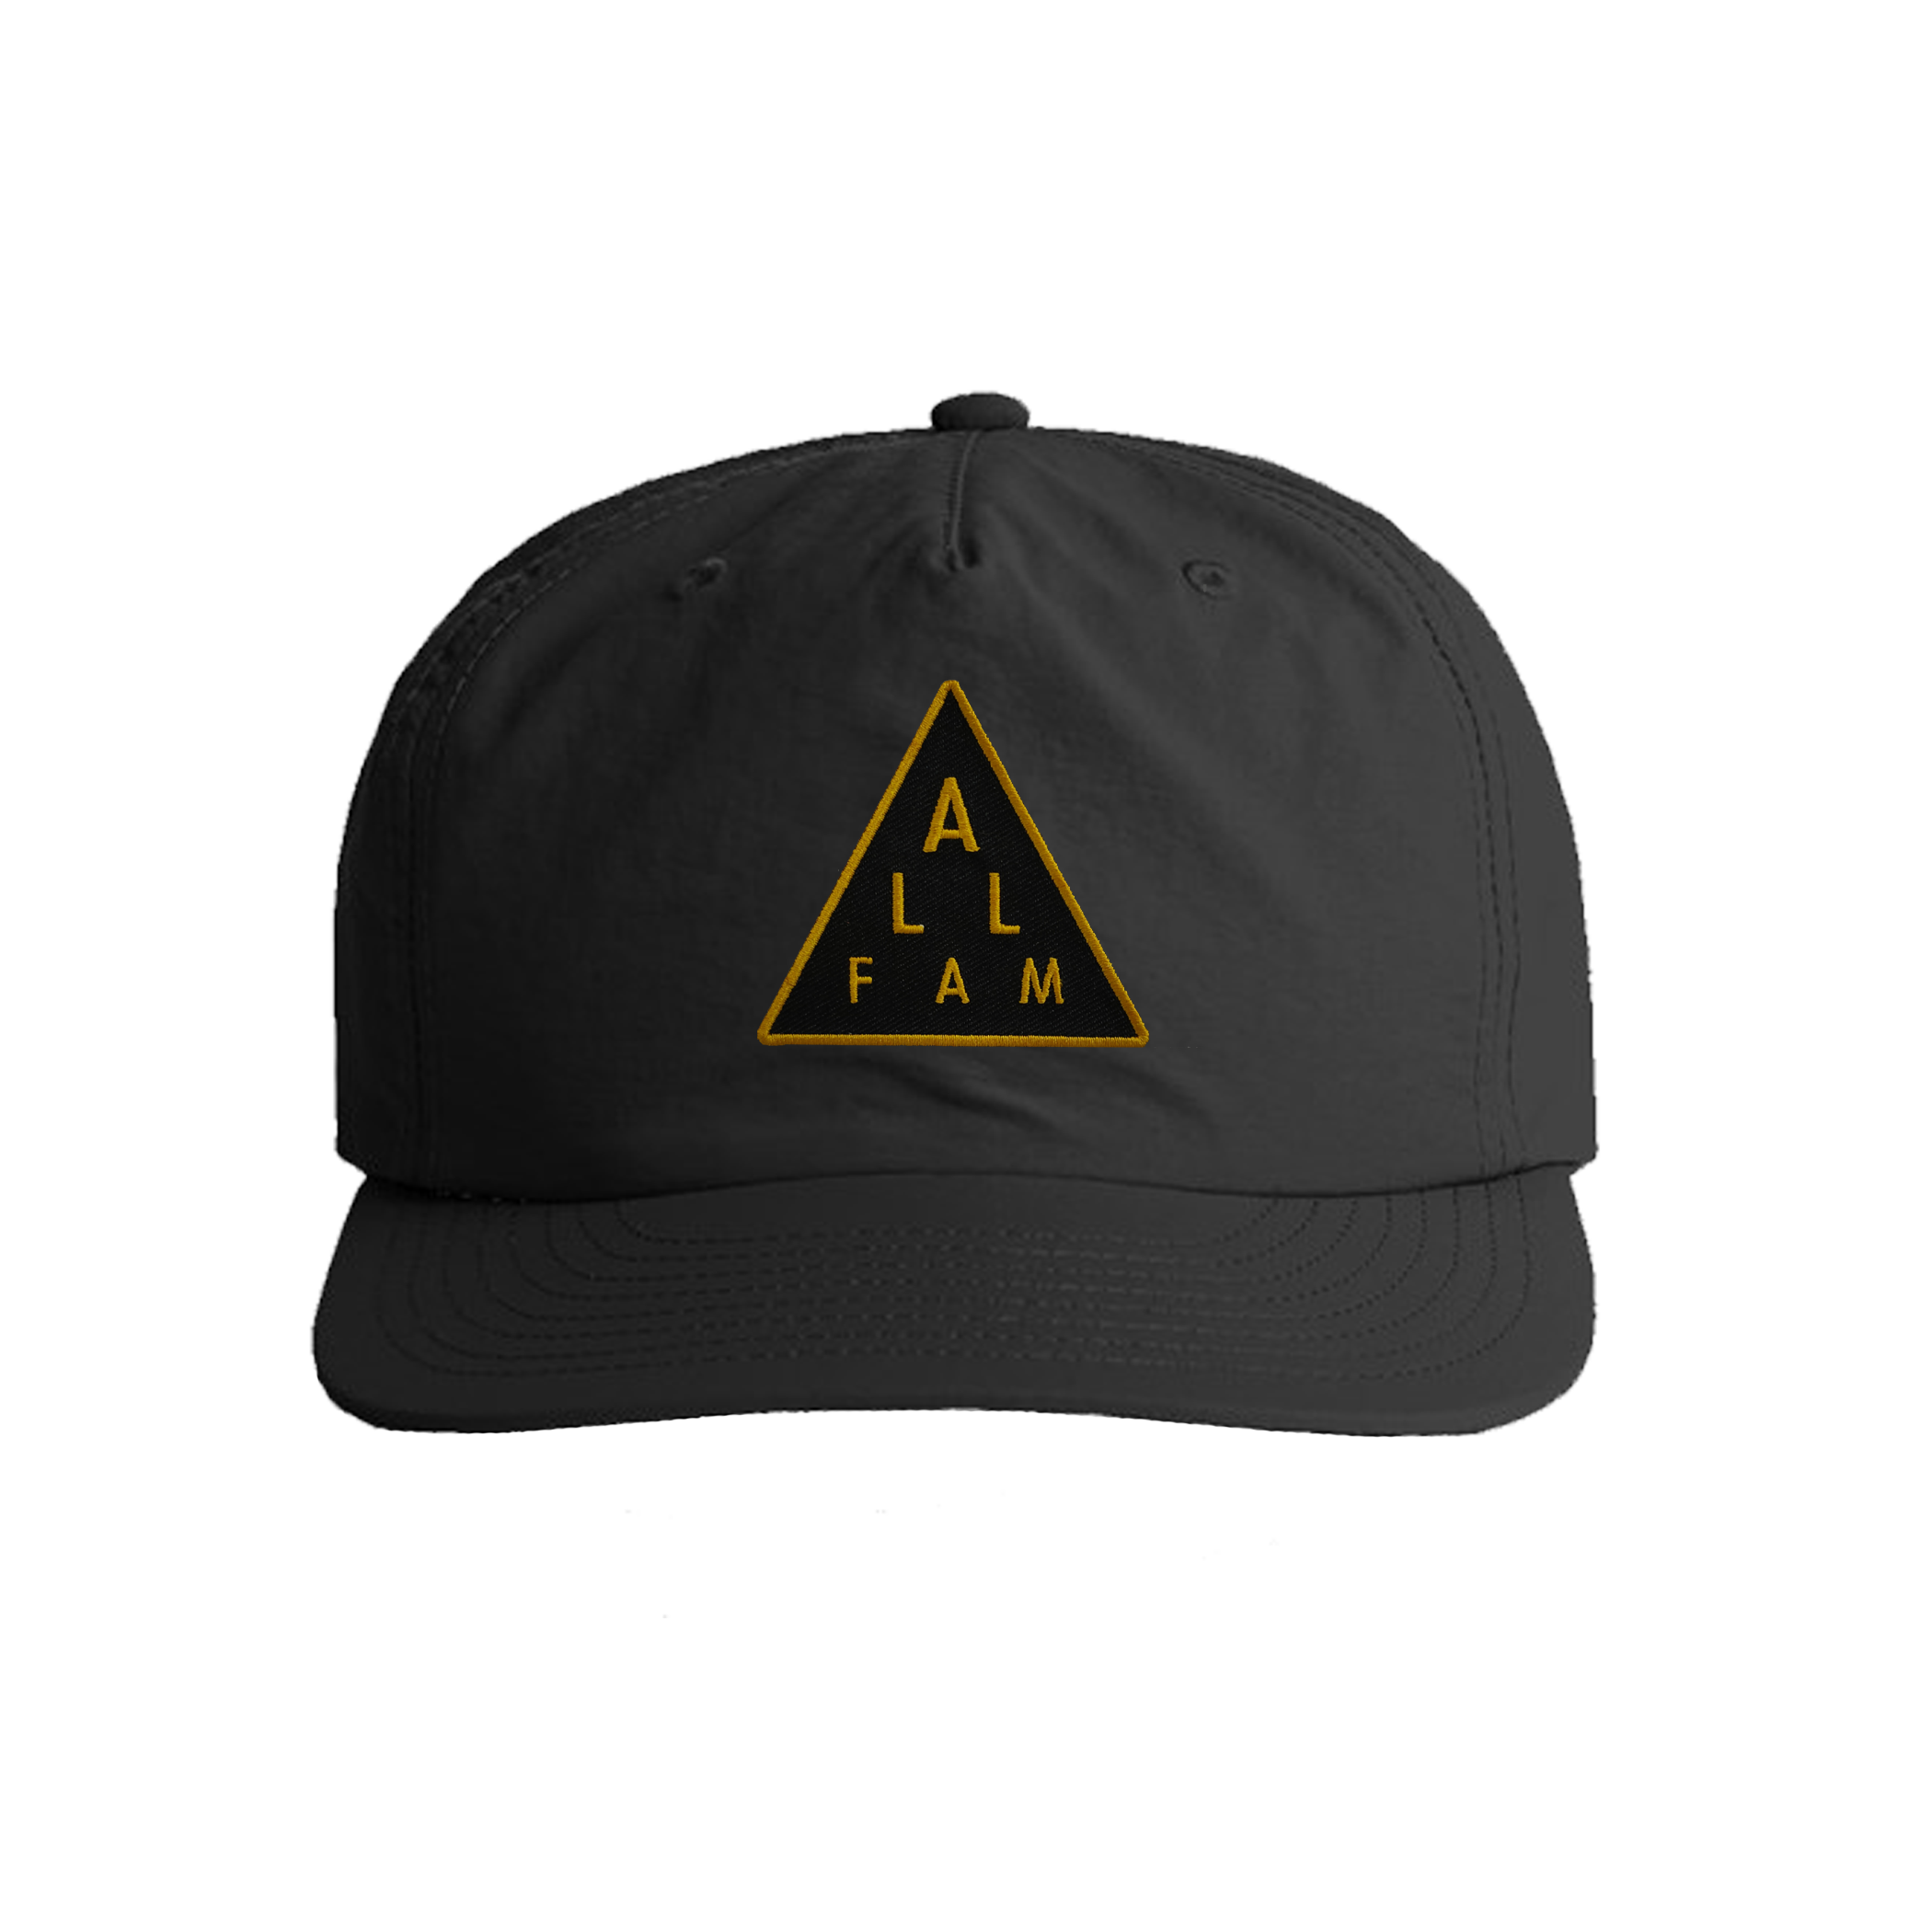 2” TRIANGLE PATCH KIDS HAT BLK